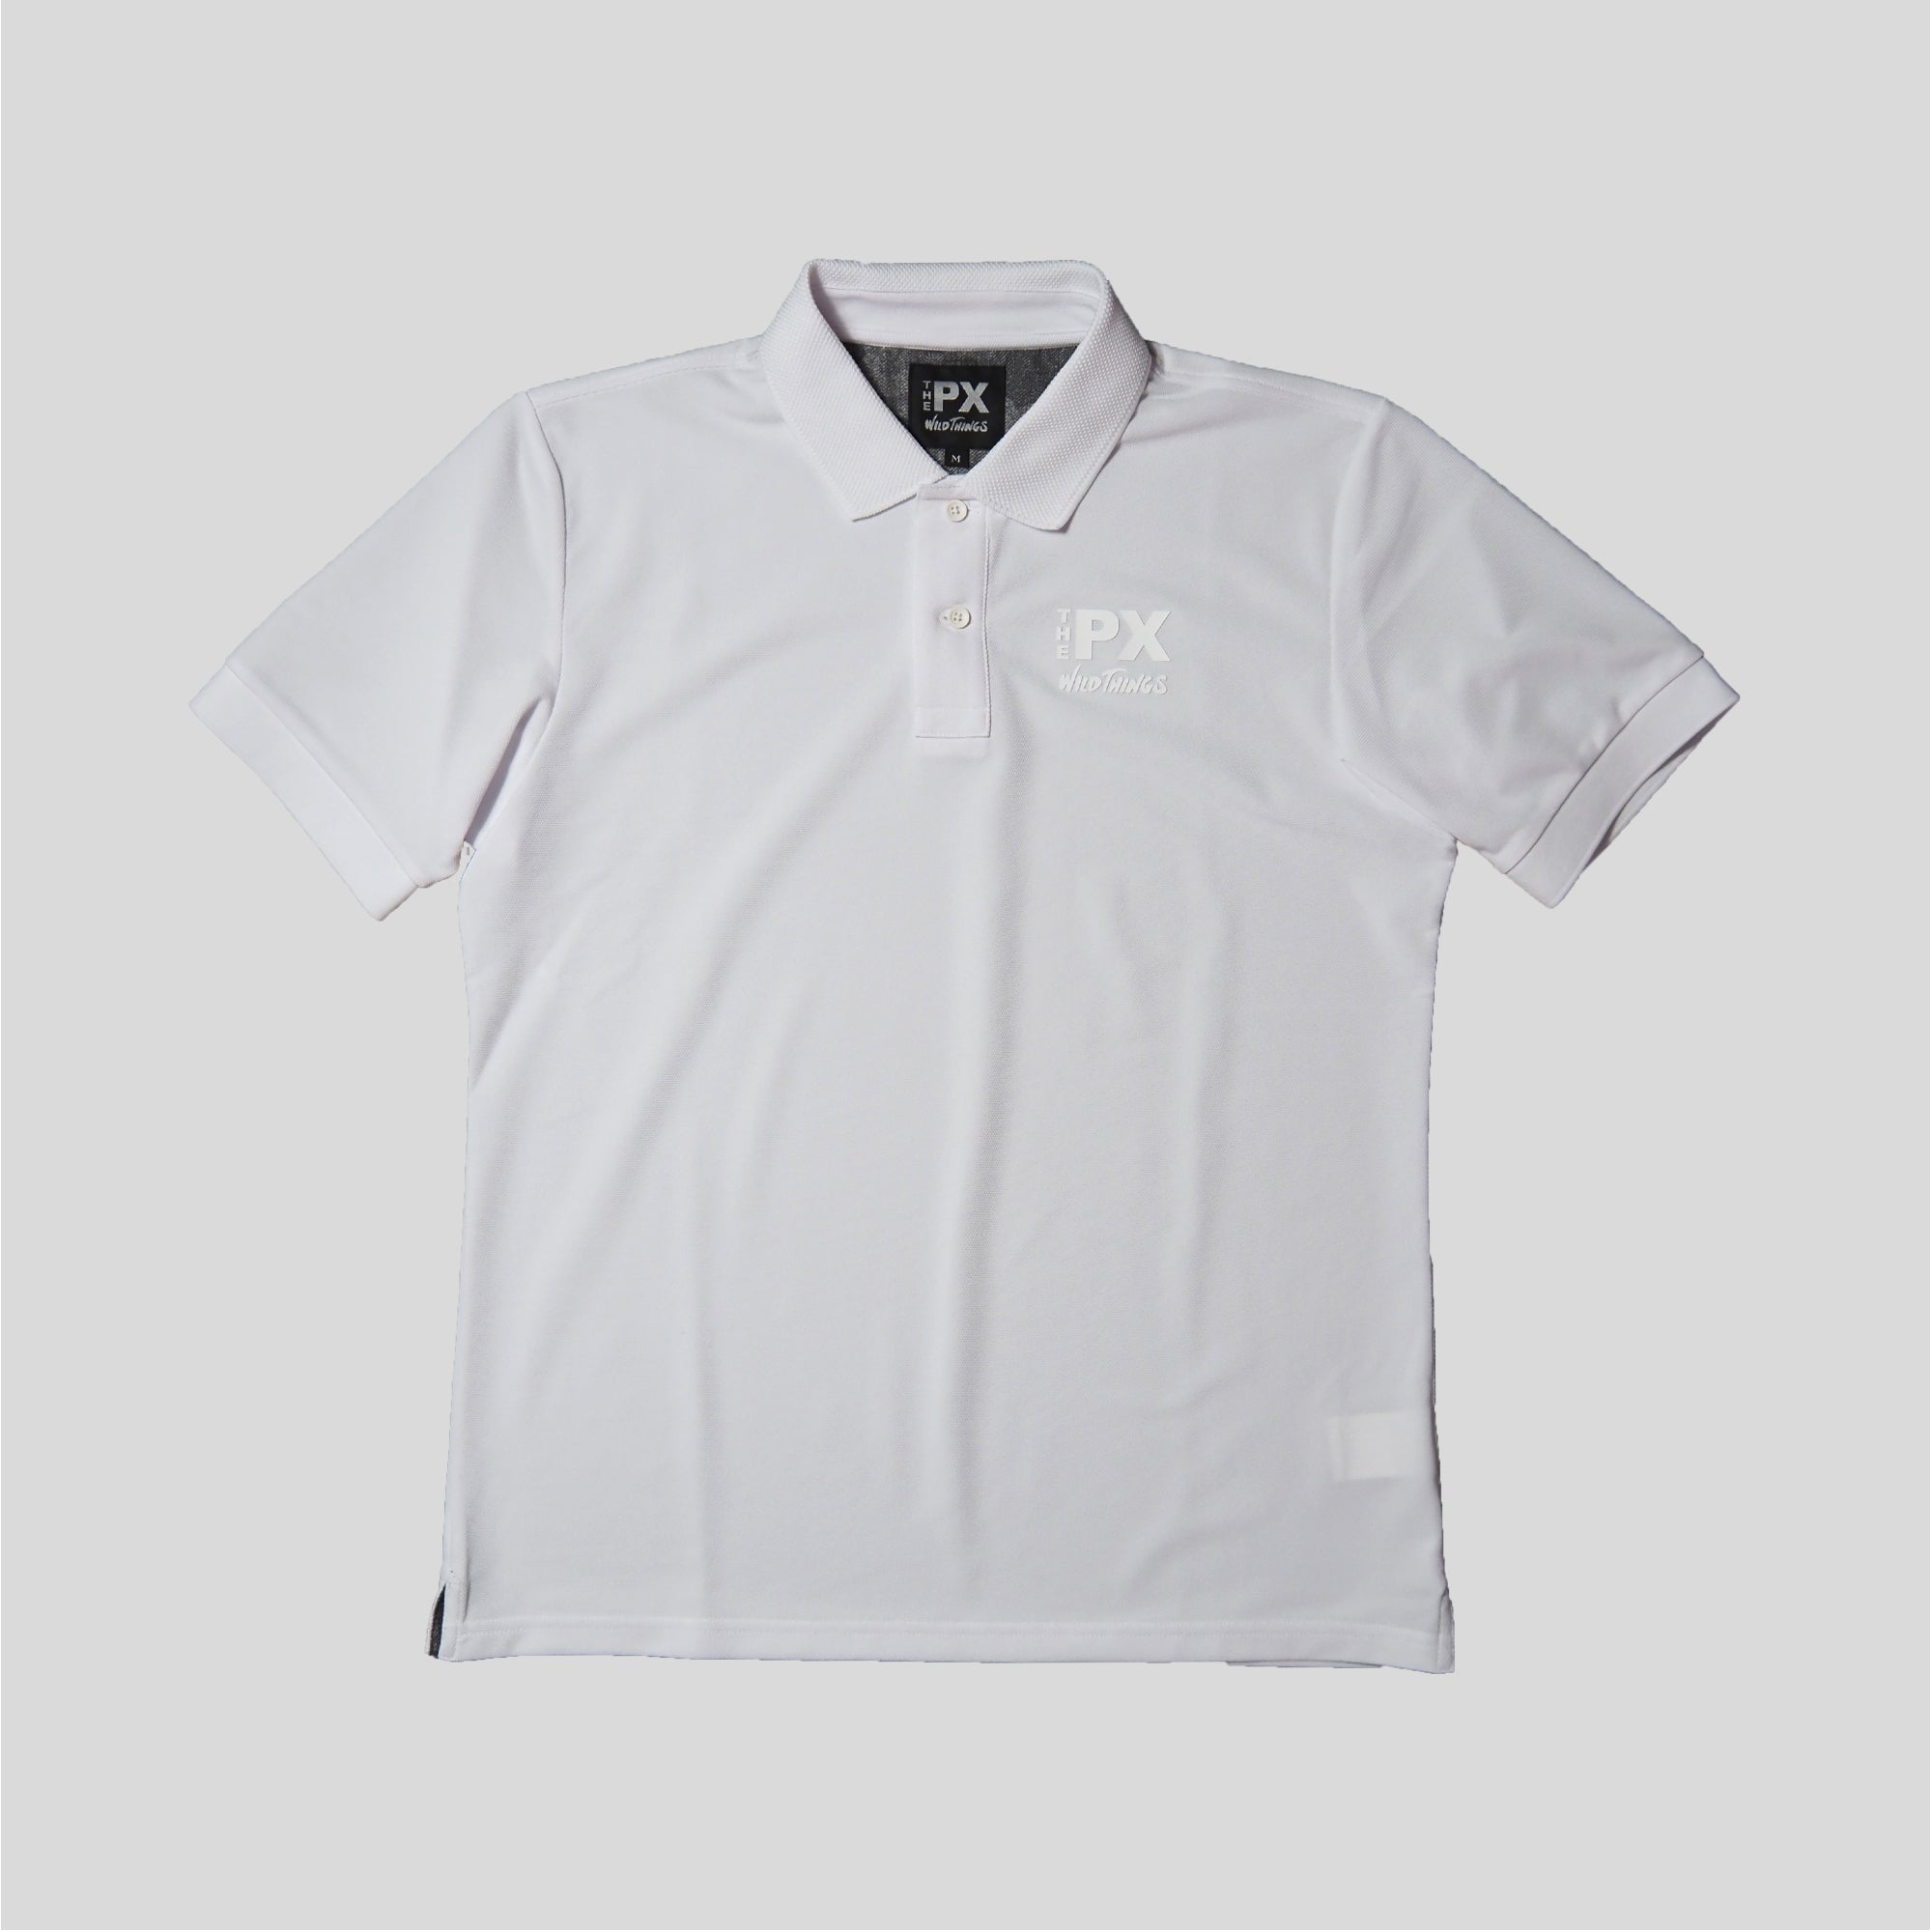 THE PX WILDTHINGS forGOLF / BASIC POLO SHIRTS [WPX230100]【島根県